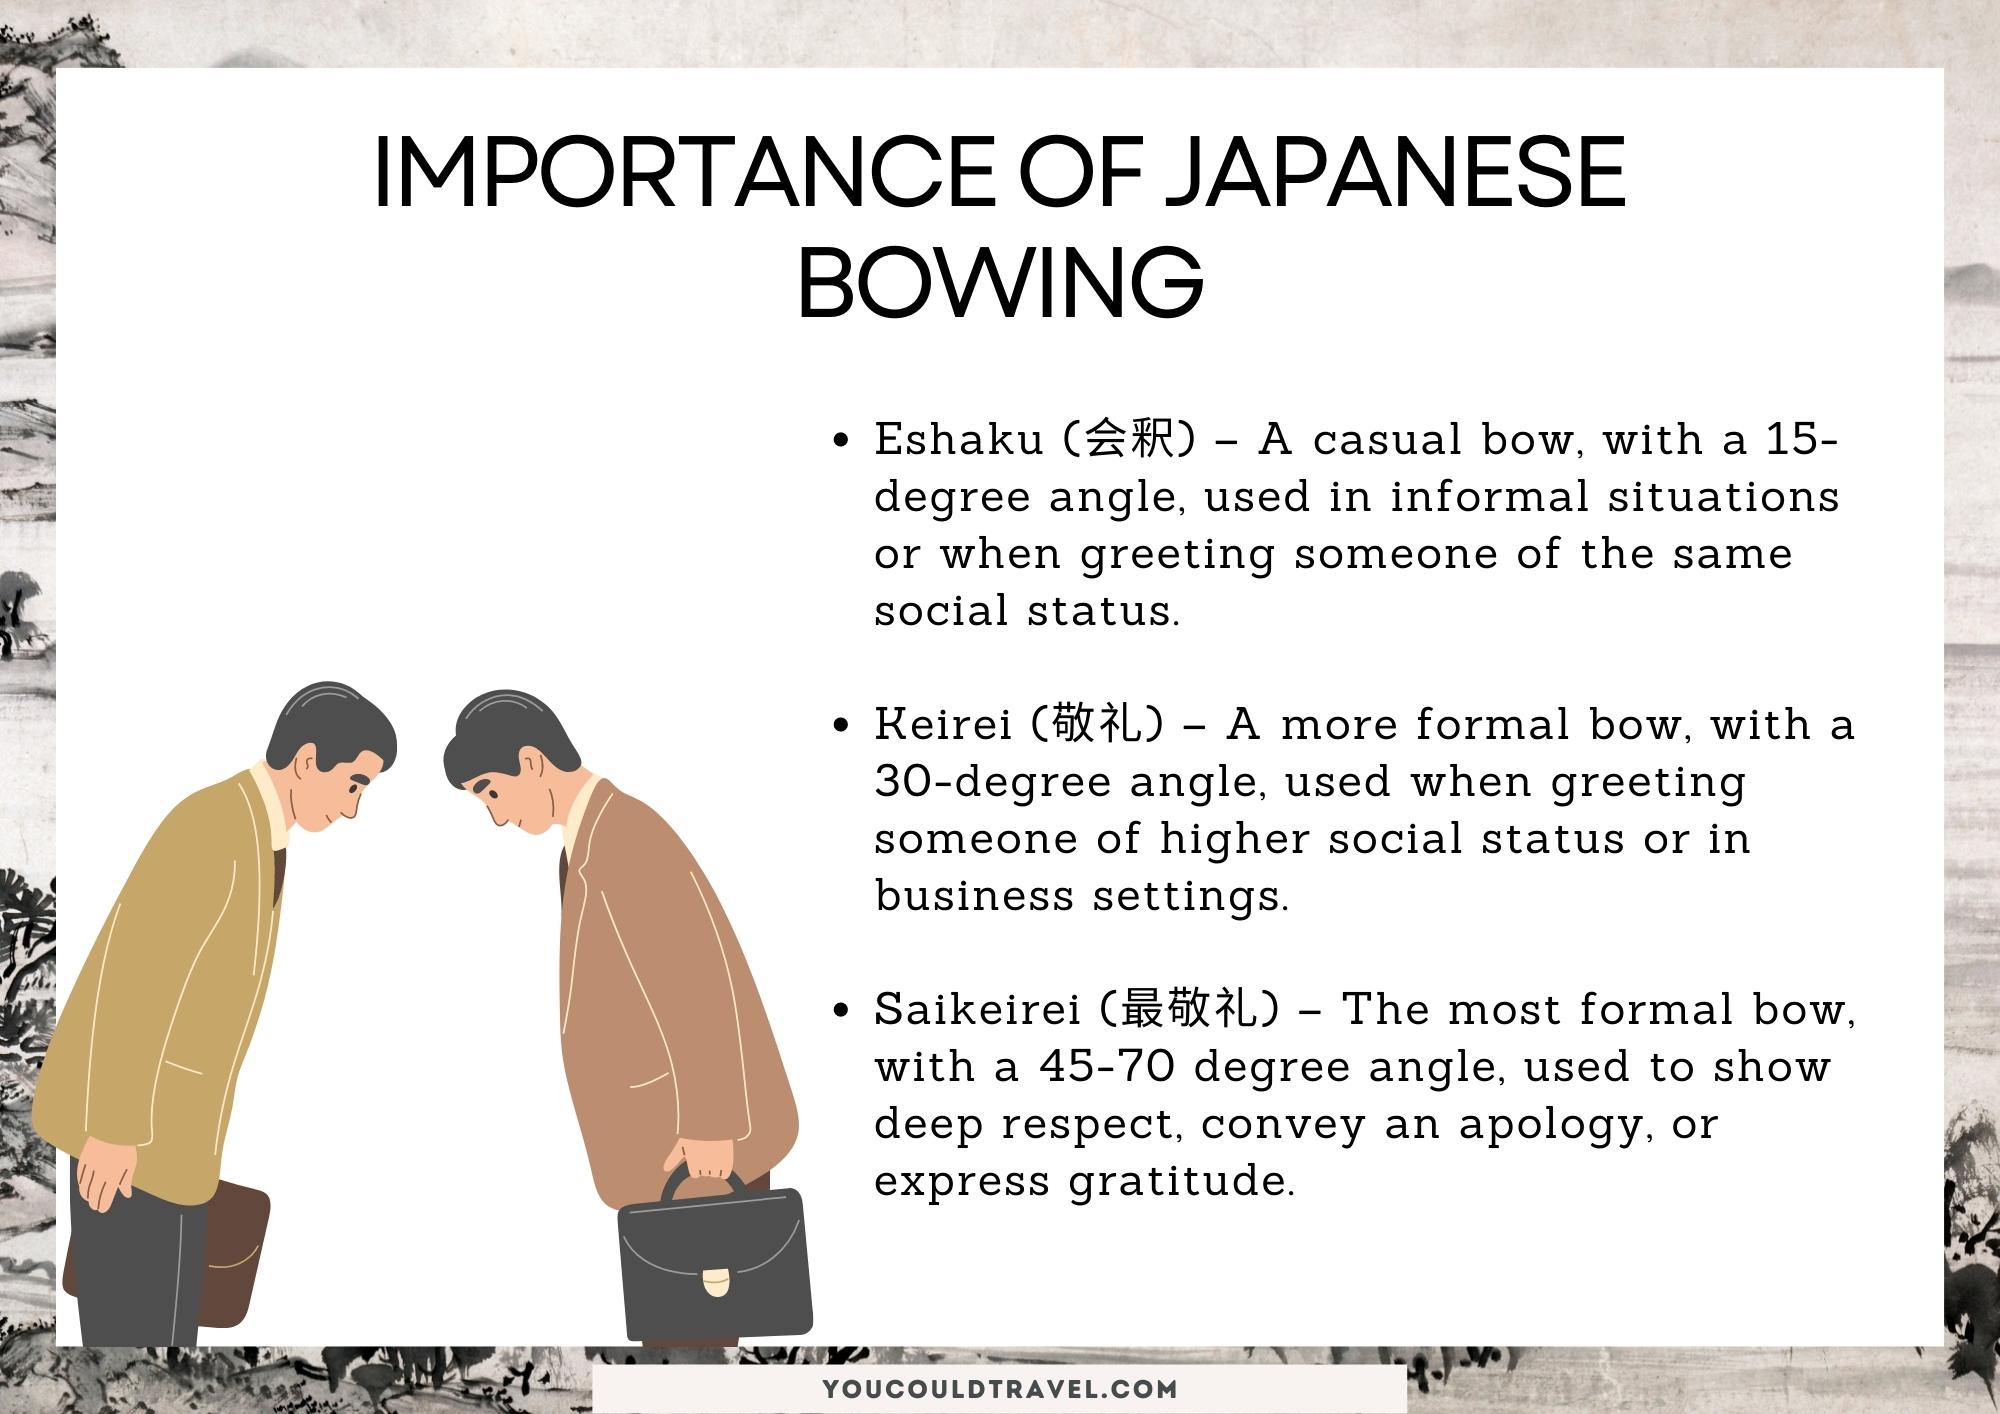 Japanese bowing culture